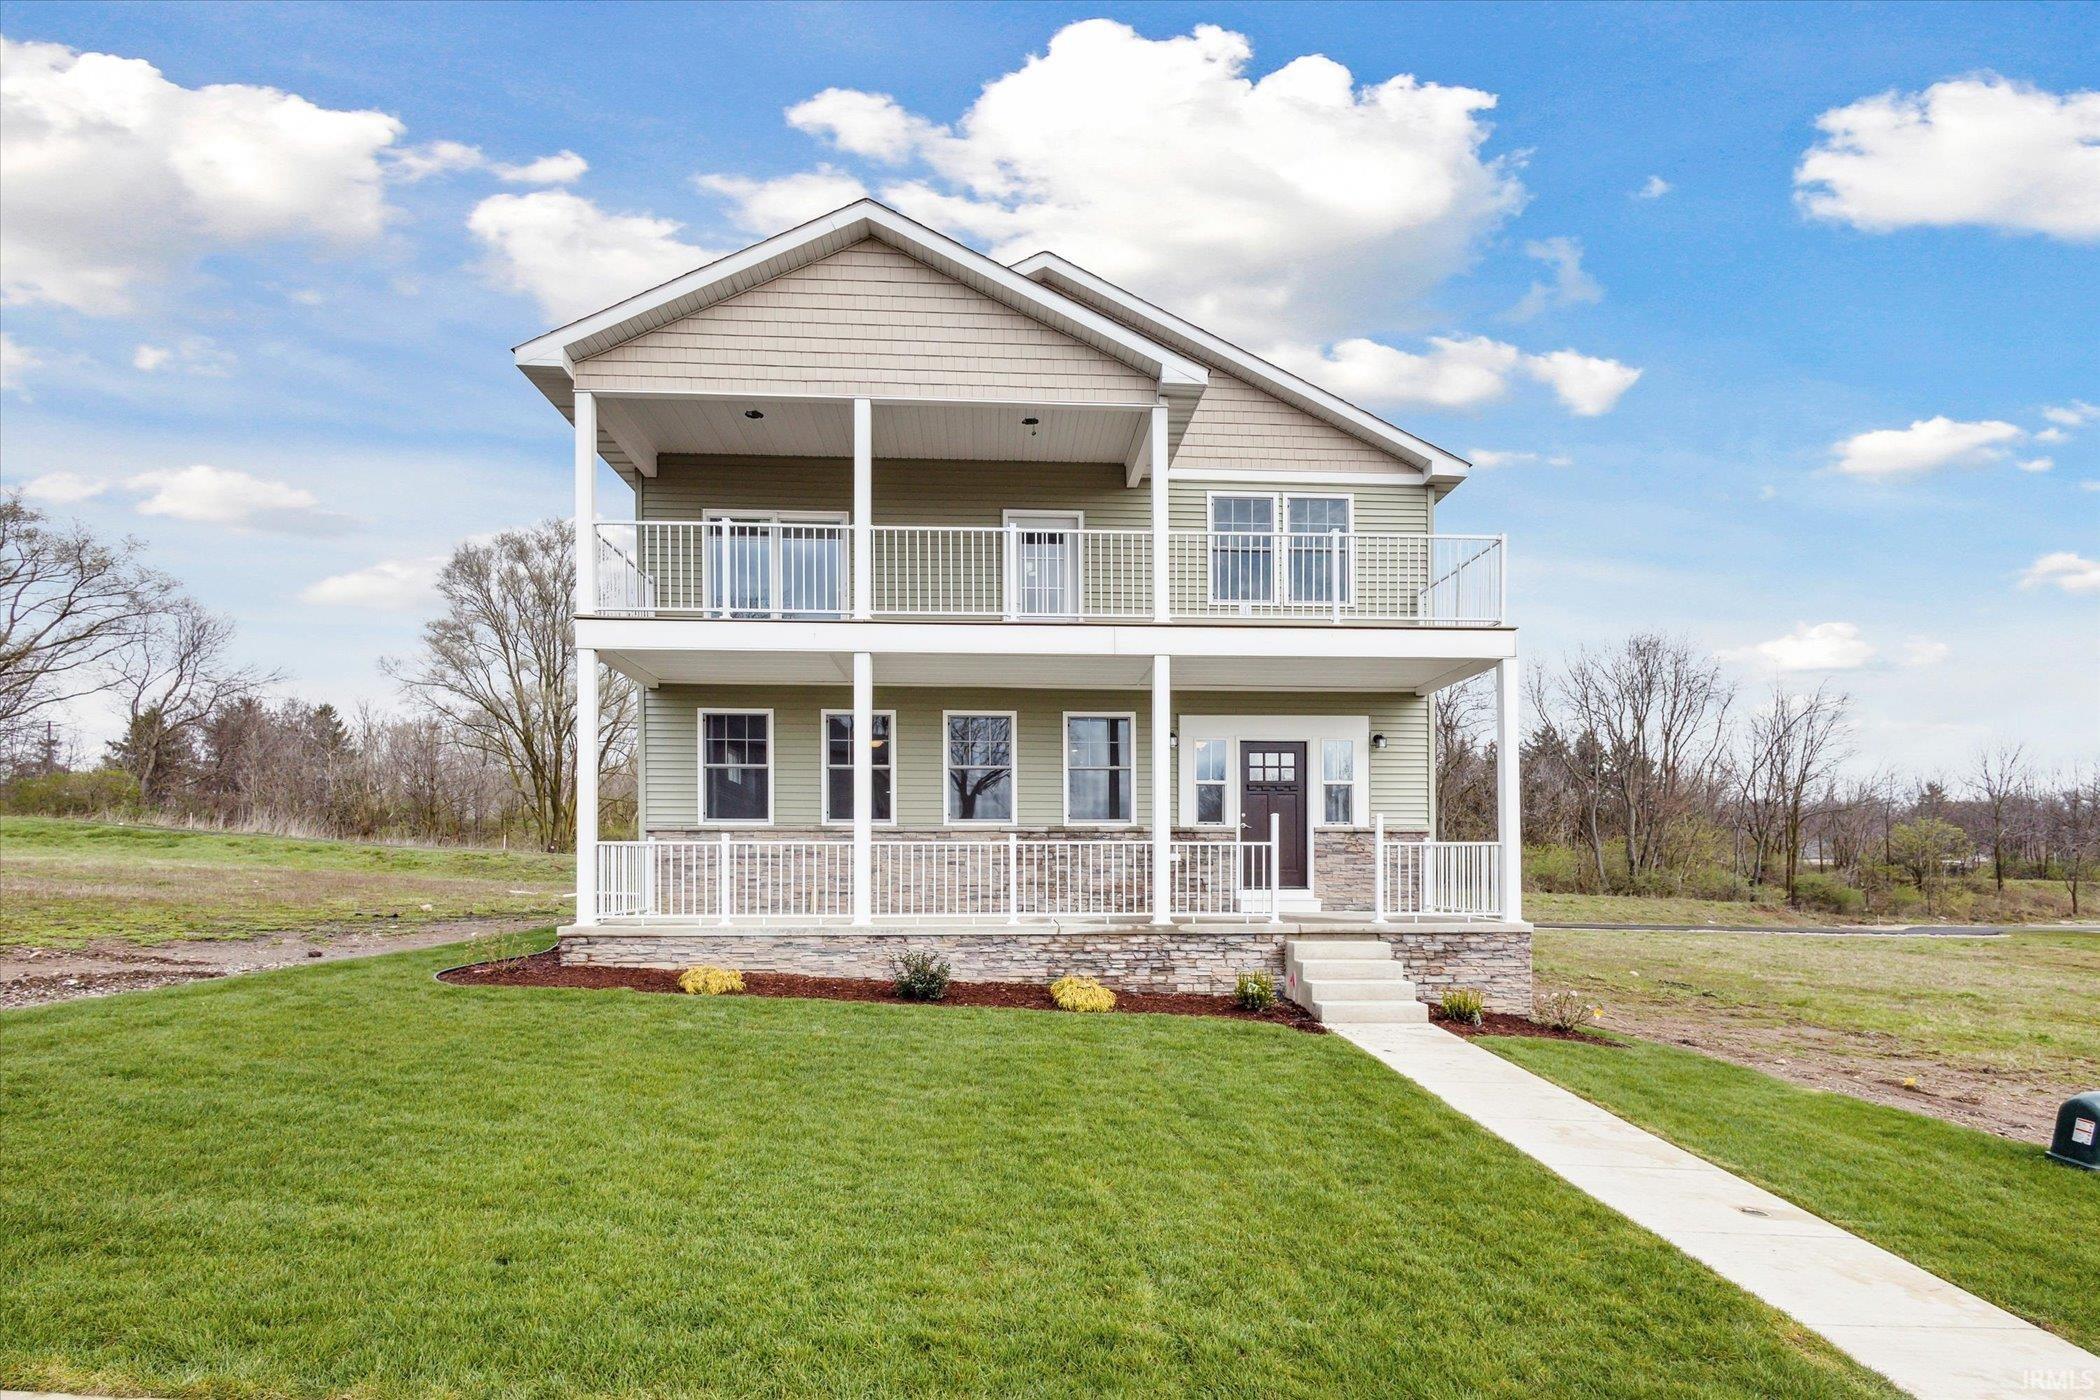 3367 Blarney Drive, South Bend, IN 